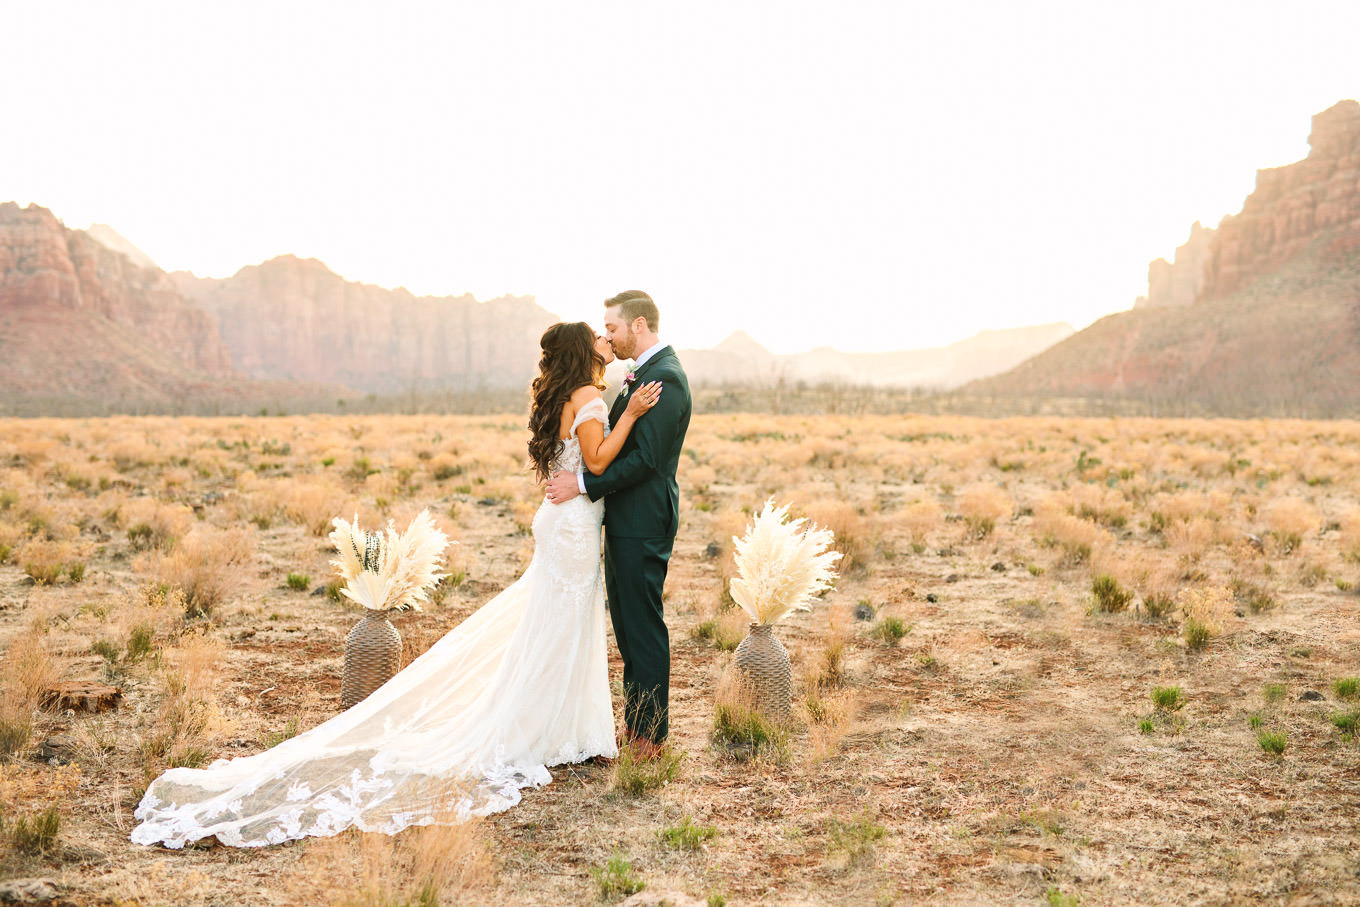 First kiss at private wedding ceremony | Zion Under Canvas camping elopement at sunrise | Colorful elopement photography | #utahelopement #zionelopement #zionwedding #undercanvaszion #sunriseelopement #adventureelopement  Source: Mary Costa Photography | Los Angeles